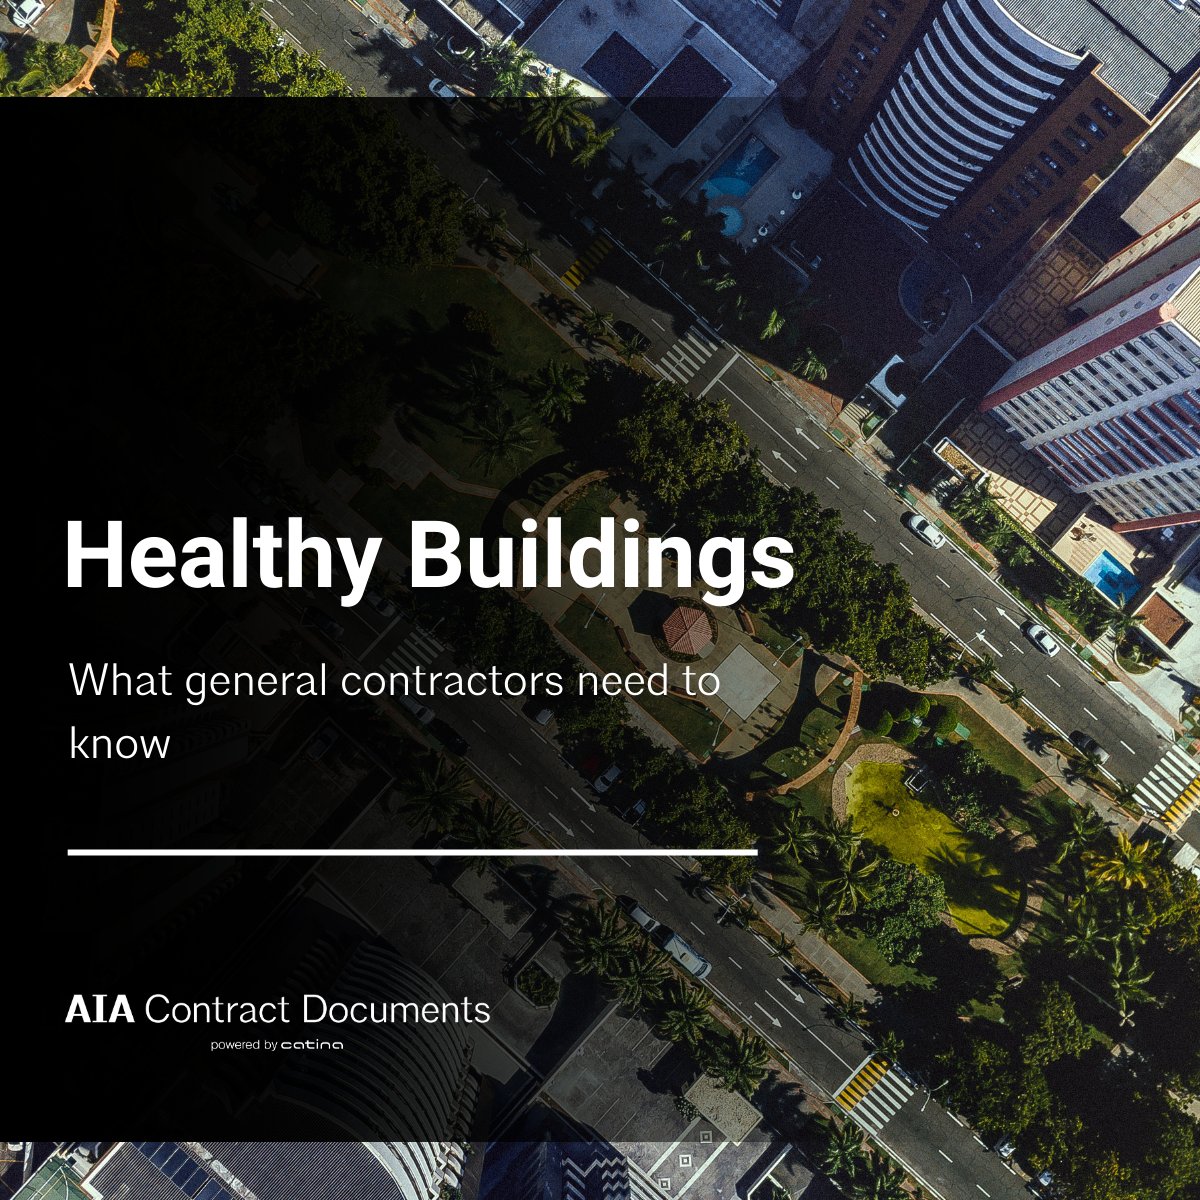 By focusing on the 9 Foundations of a Healthy Building, contractors can prioritize the health and well-being of building occupants: bit.ly/3TAe7OR

#SustainableConstruction #HealthyBuildings